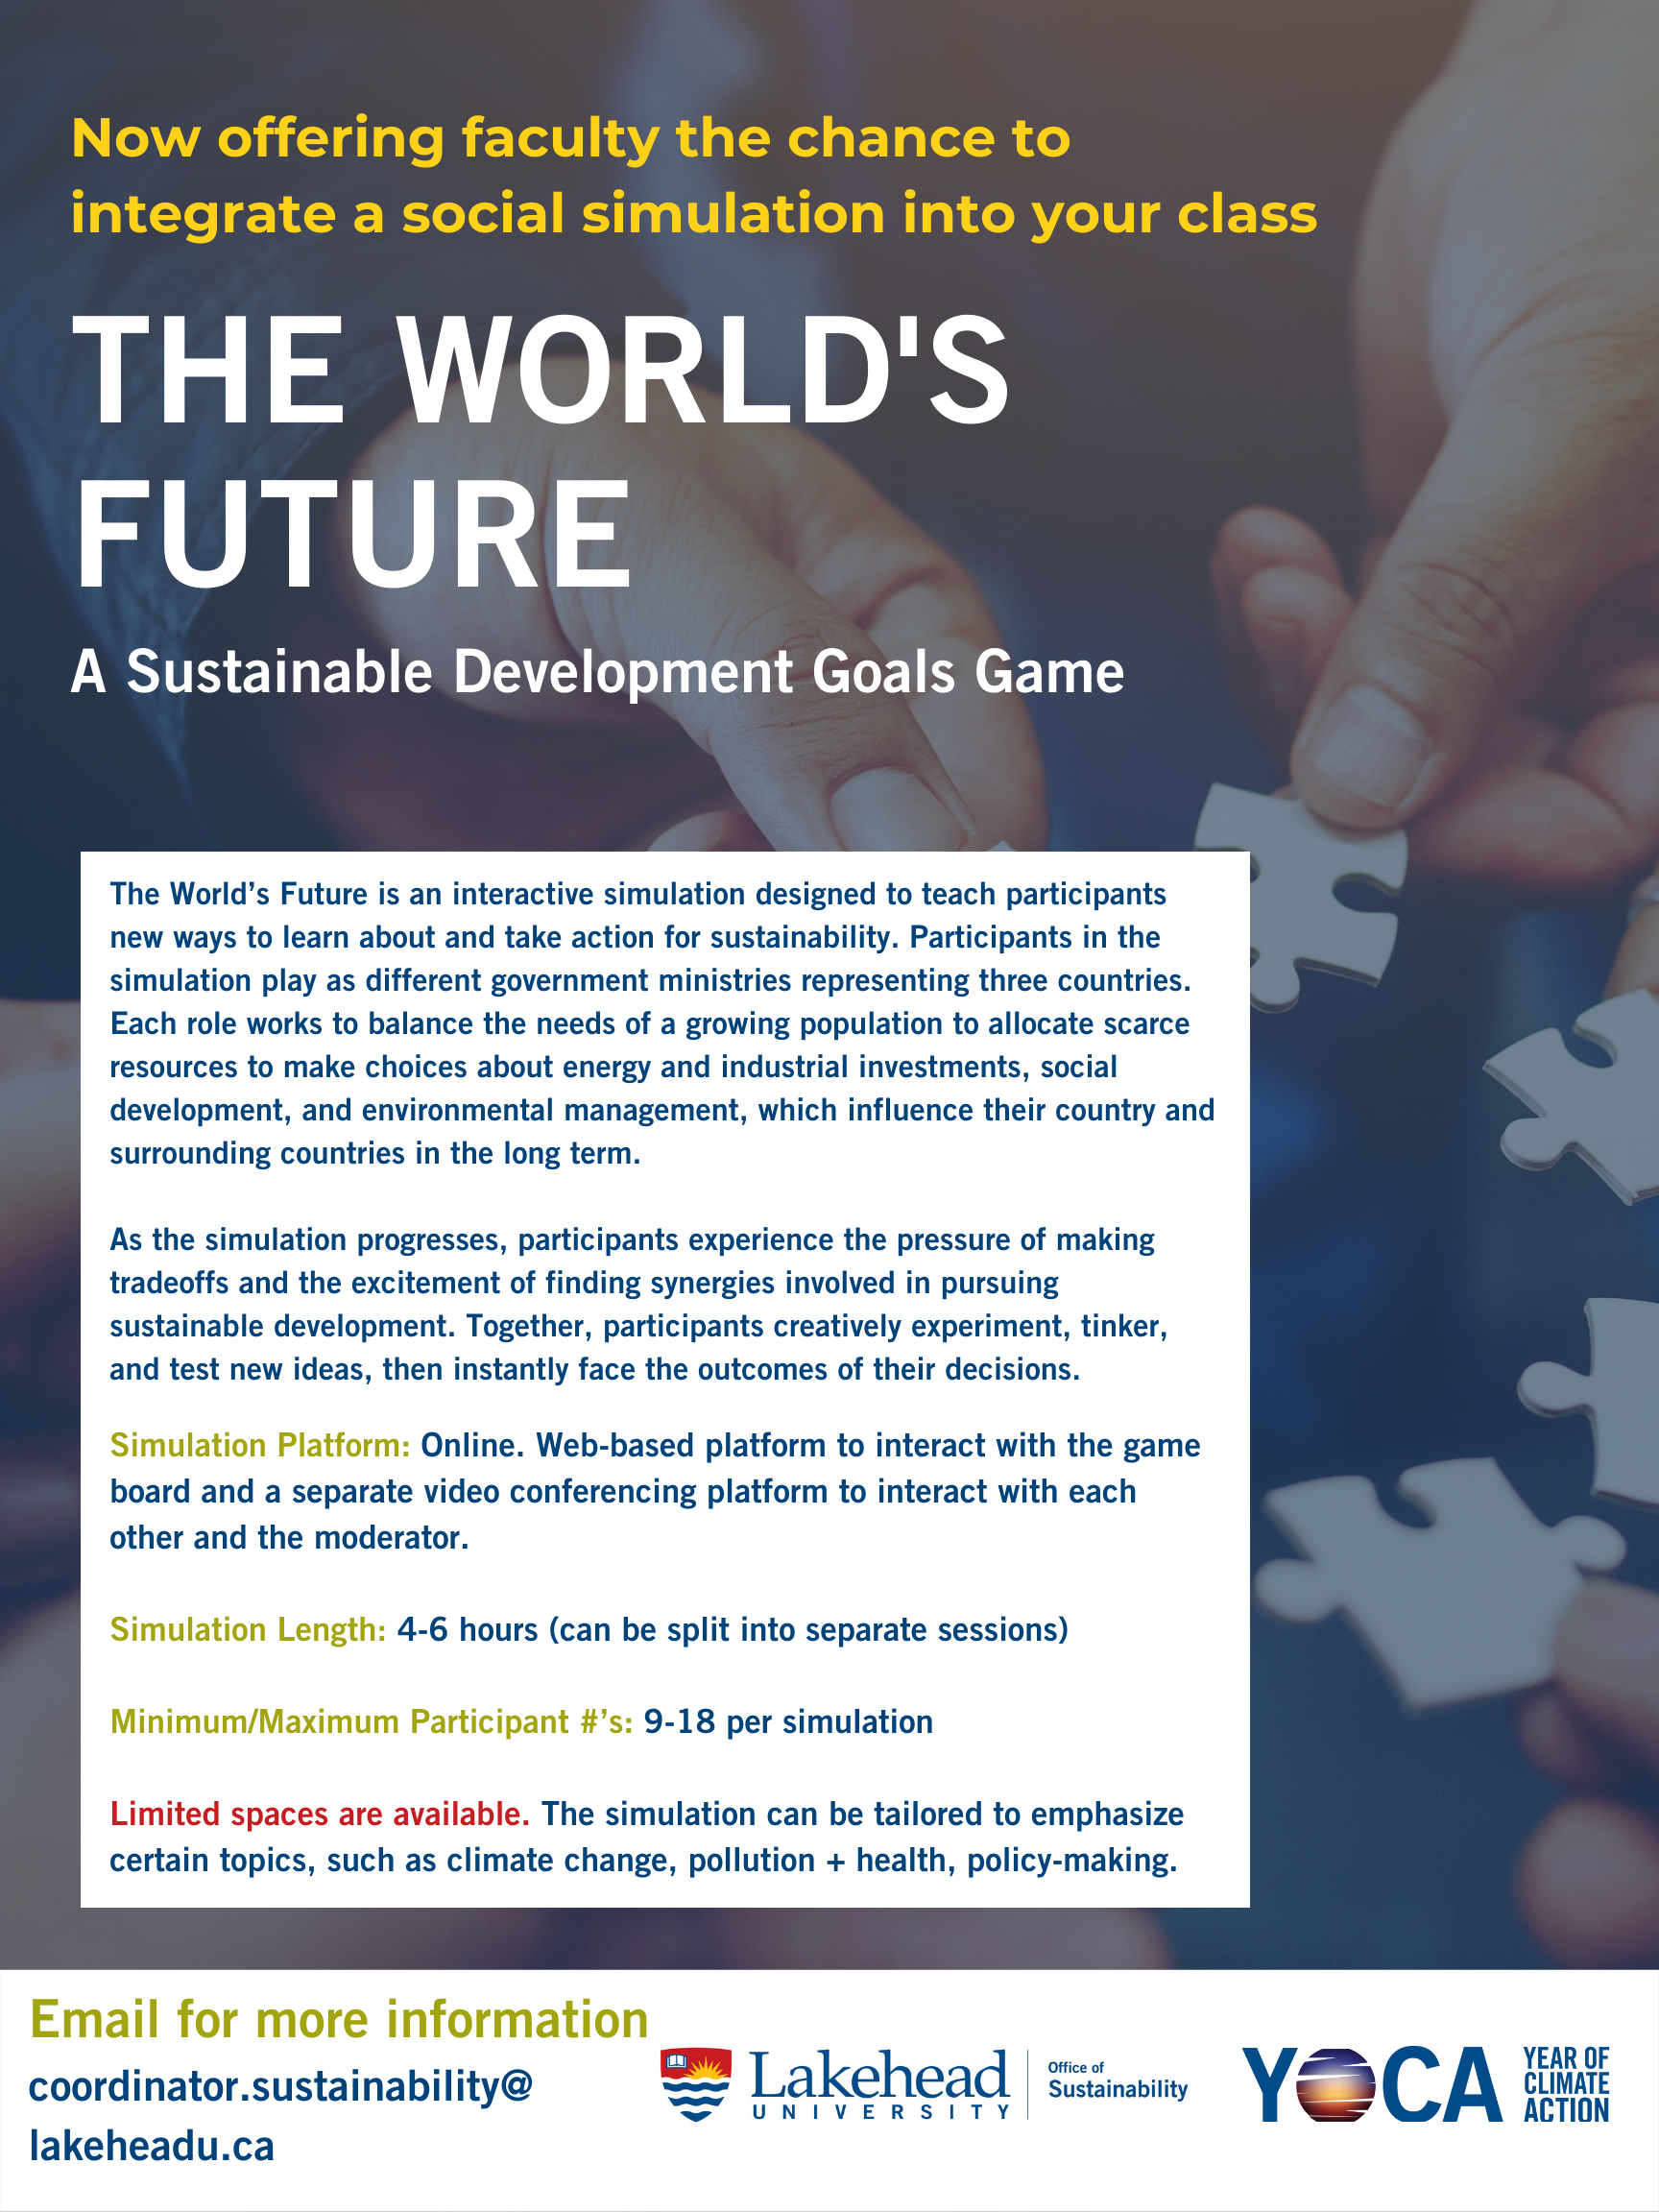 The World's Future - a social simulation being offered to classes